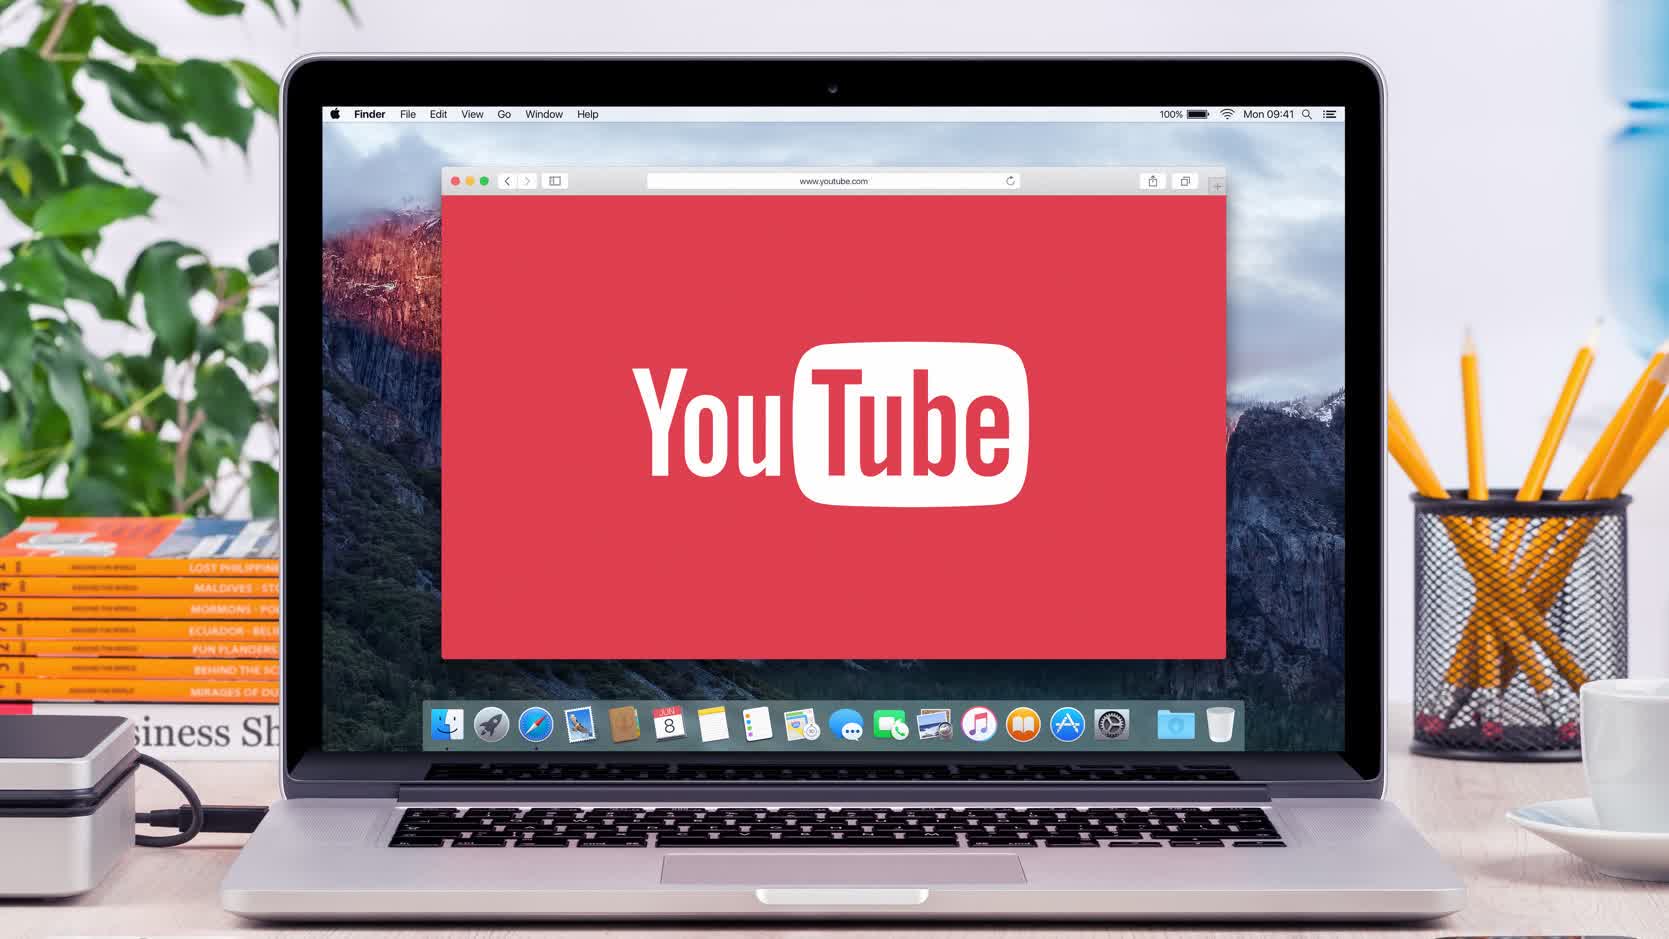 YouTube launches new streaming hub called Primetime Channels